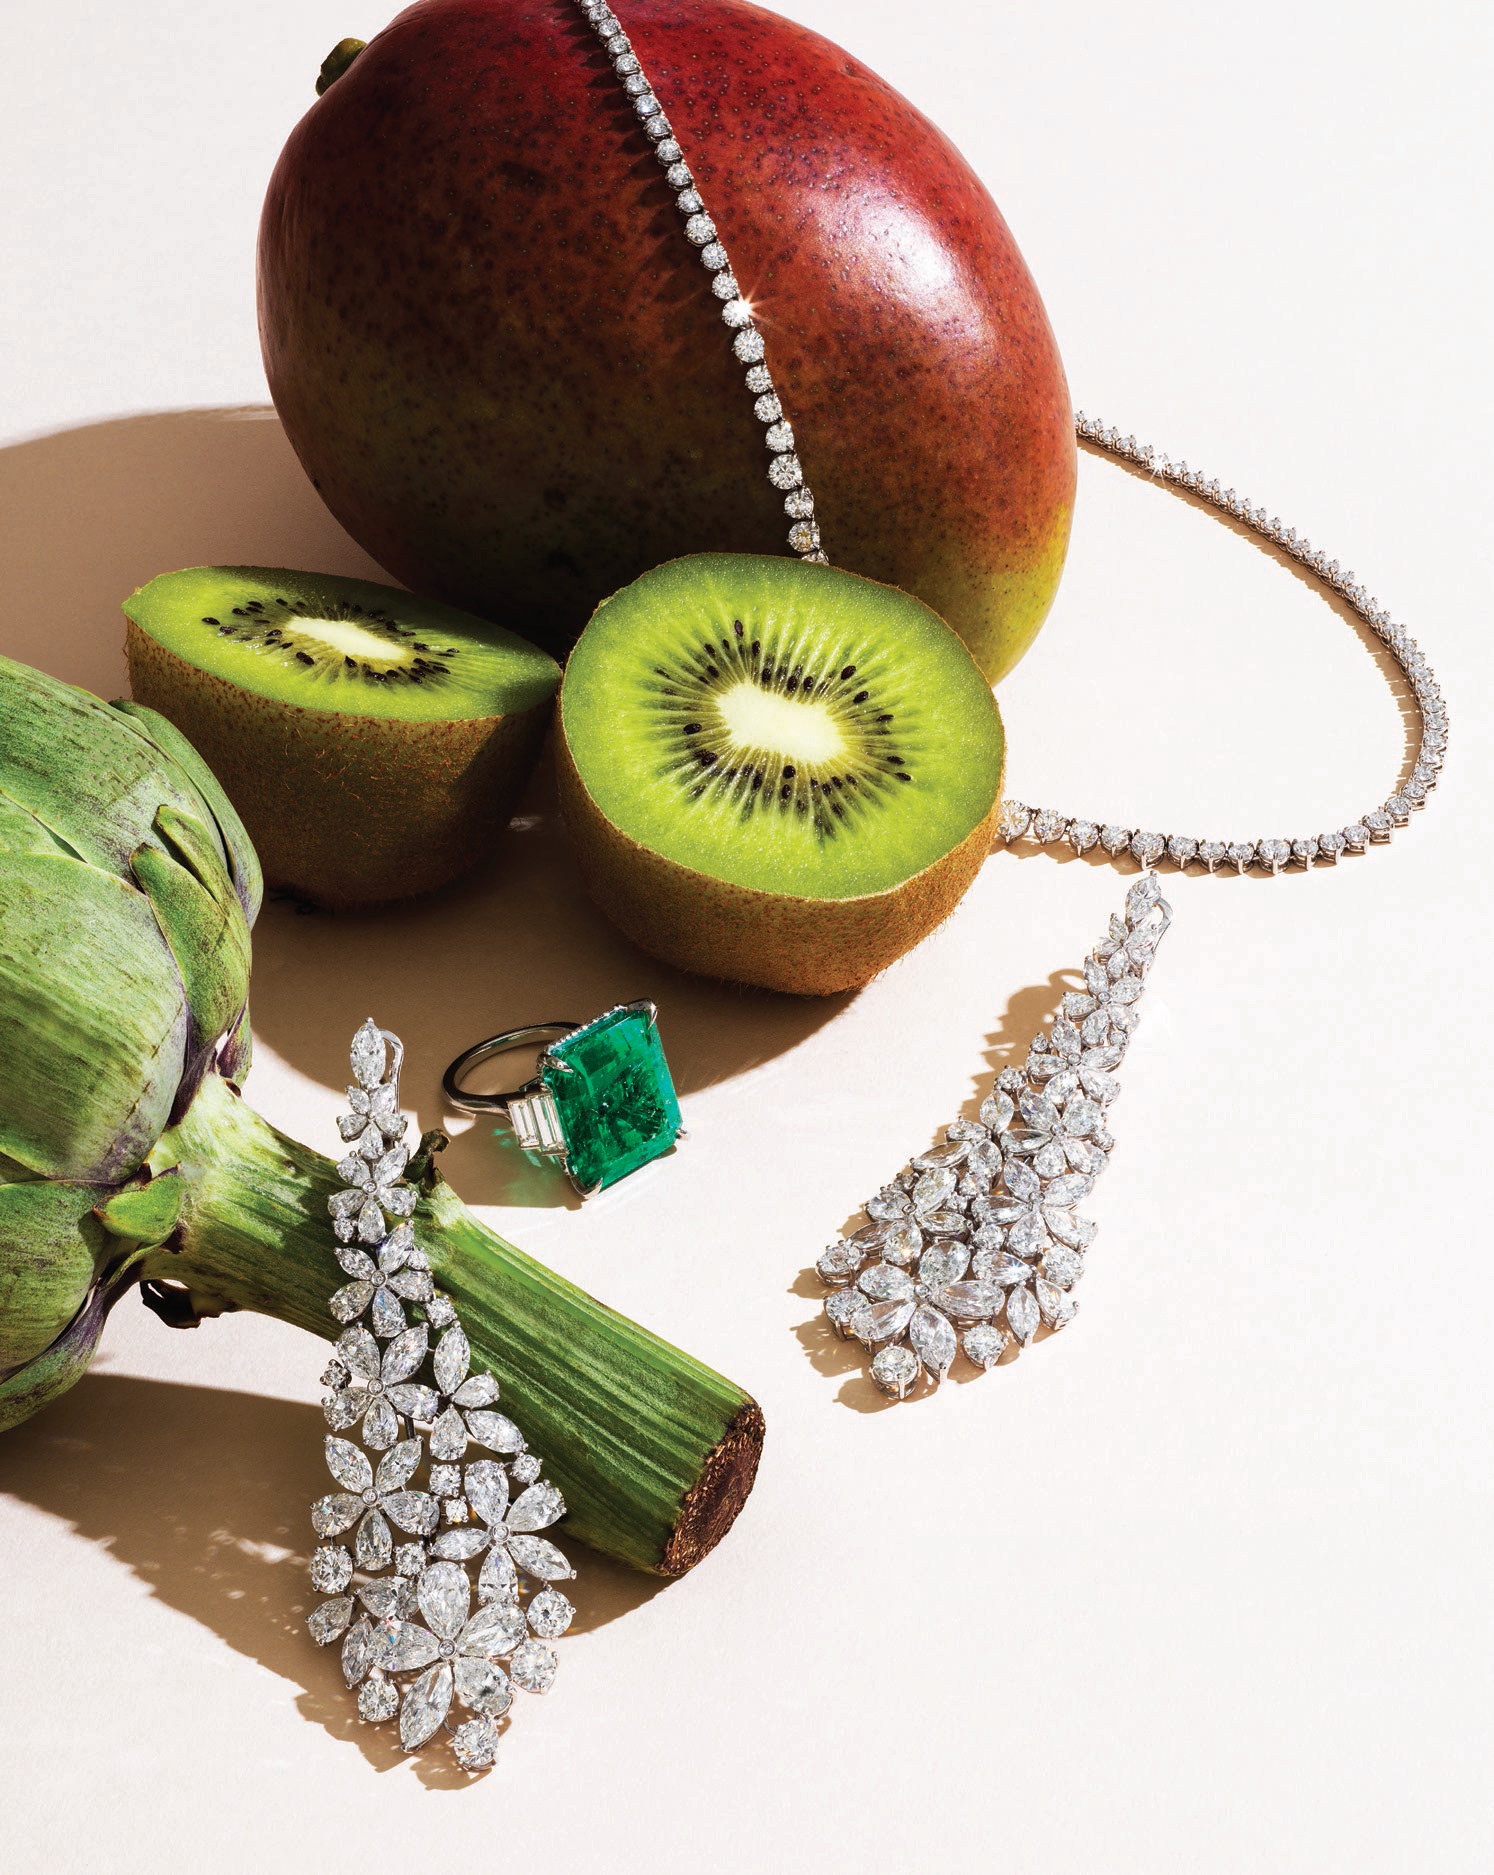 From top: Kwiat Riviera diamond necklace and emerald and diamond ring, kwiat.com; Graff Carissa collection earrings featuring 42.34 carats of diamonds set in white gold, graff.com. Photographed by BRIAN KLUTCH Styled by FAYE POWER VANDE VREDE